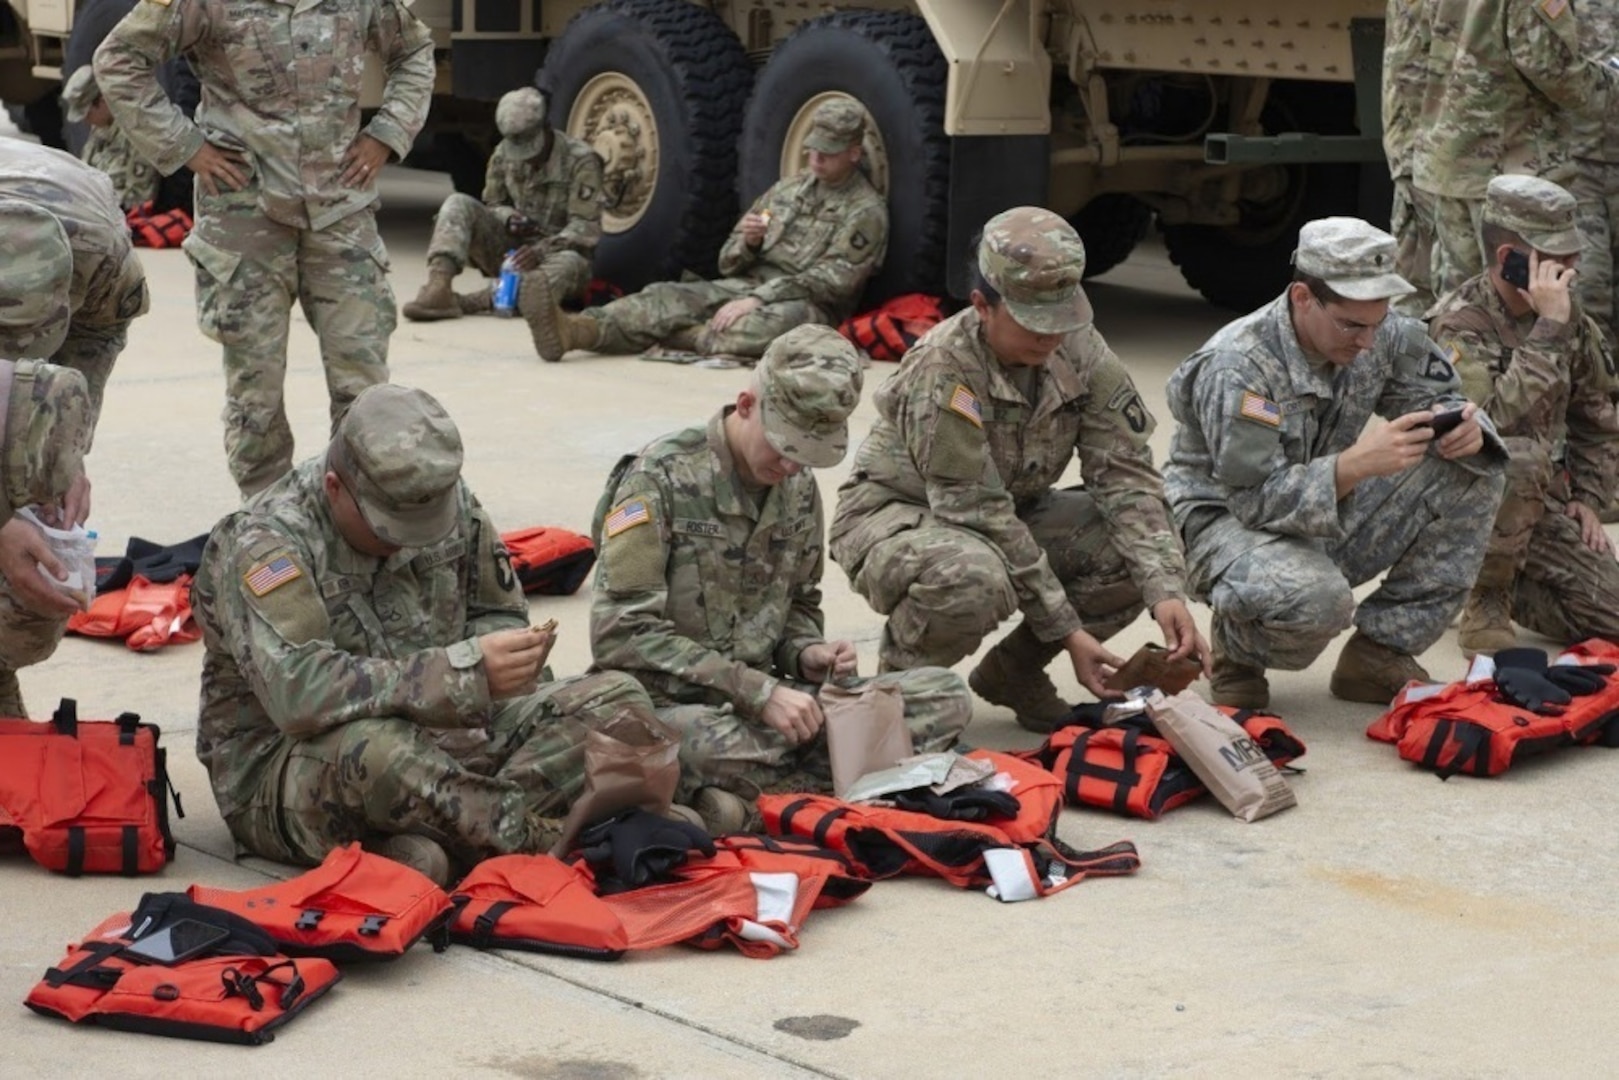 Soldiers with the 74th Composite Truck Company, 129th Combat Support Sustainment Battalion, 101st Sustainment Brigade, 101st Airborne Division rest at Fort Bragg, North Carolina, Sept. 22, 2018. The soldiers have been conducting high-water rescue and relief operations in Lumberton, North Carolina. The soldiers deployed from Fort Campbell, Kentucky, to assist with the response to Hurricane Florence.